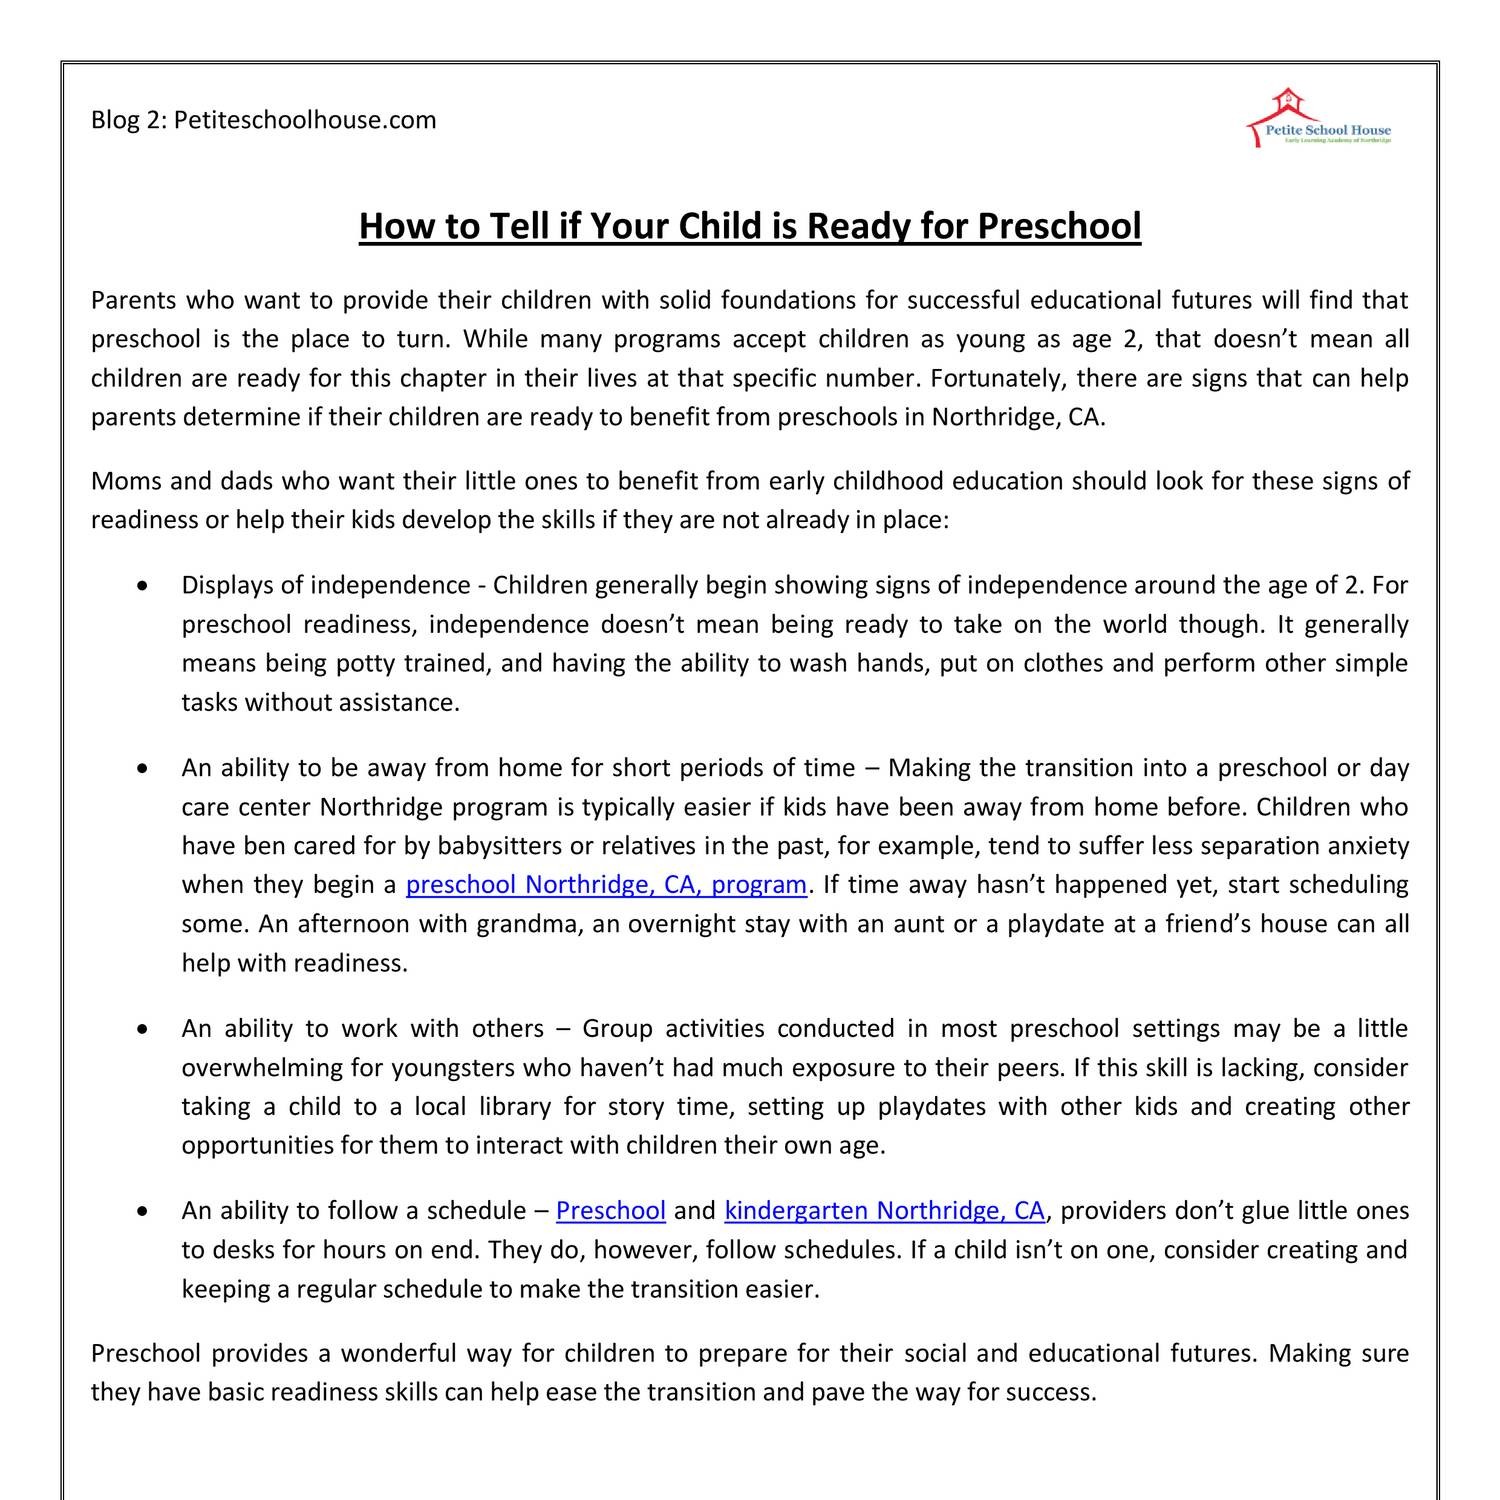 How to Tell if Your Child is Ready for Preschool.pdf DocDroid